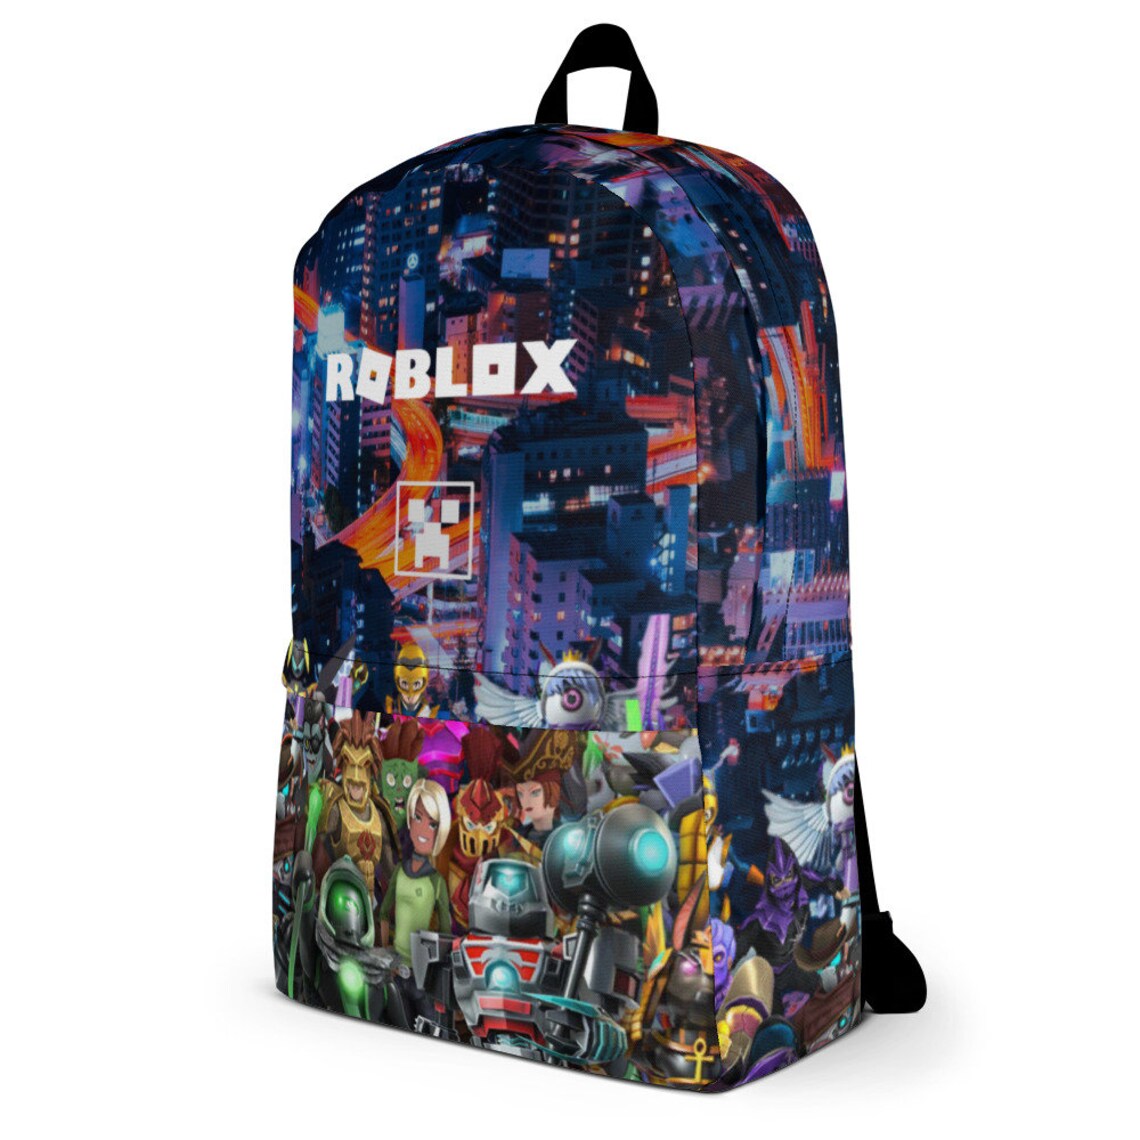 Boys Roblox School Backpack Punky Roblox Family Unique design | Etsy